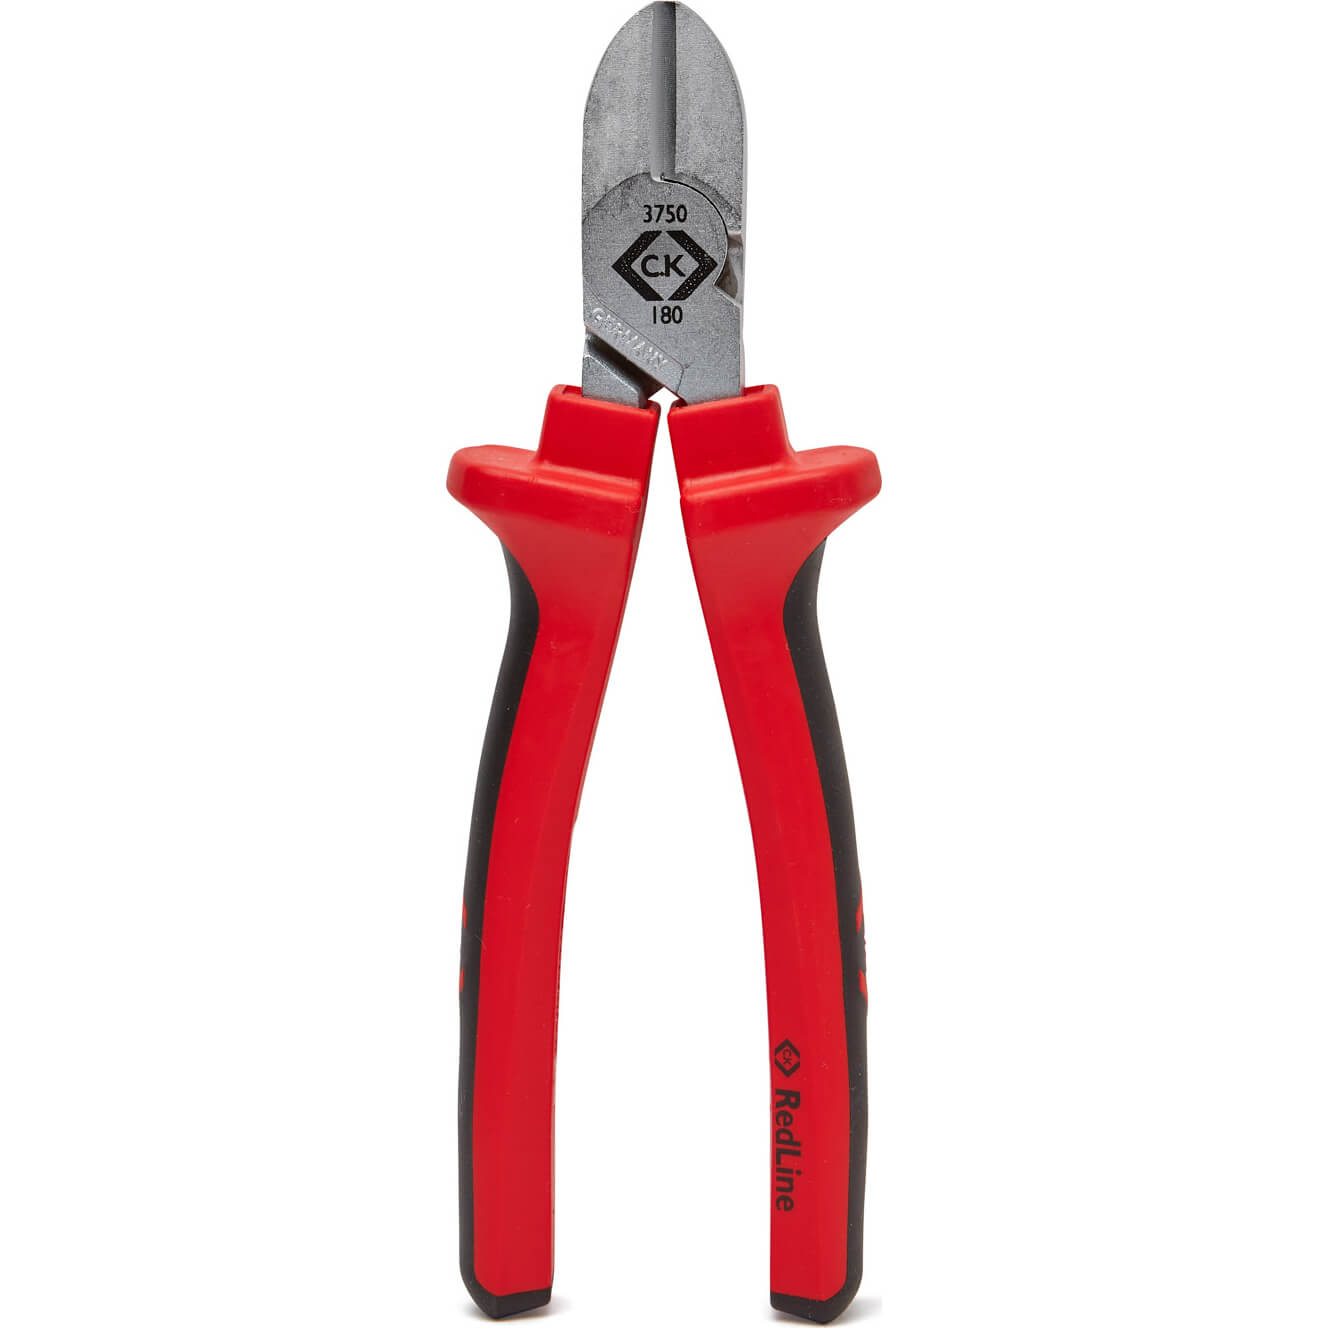 Photos - Utility Knife CK Tools CK RedLine Side Cutters 180mm T3750 180 